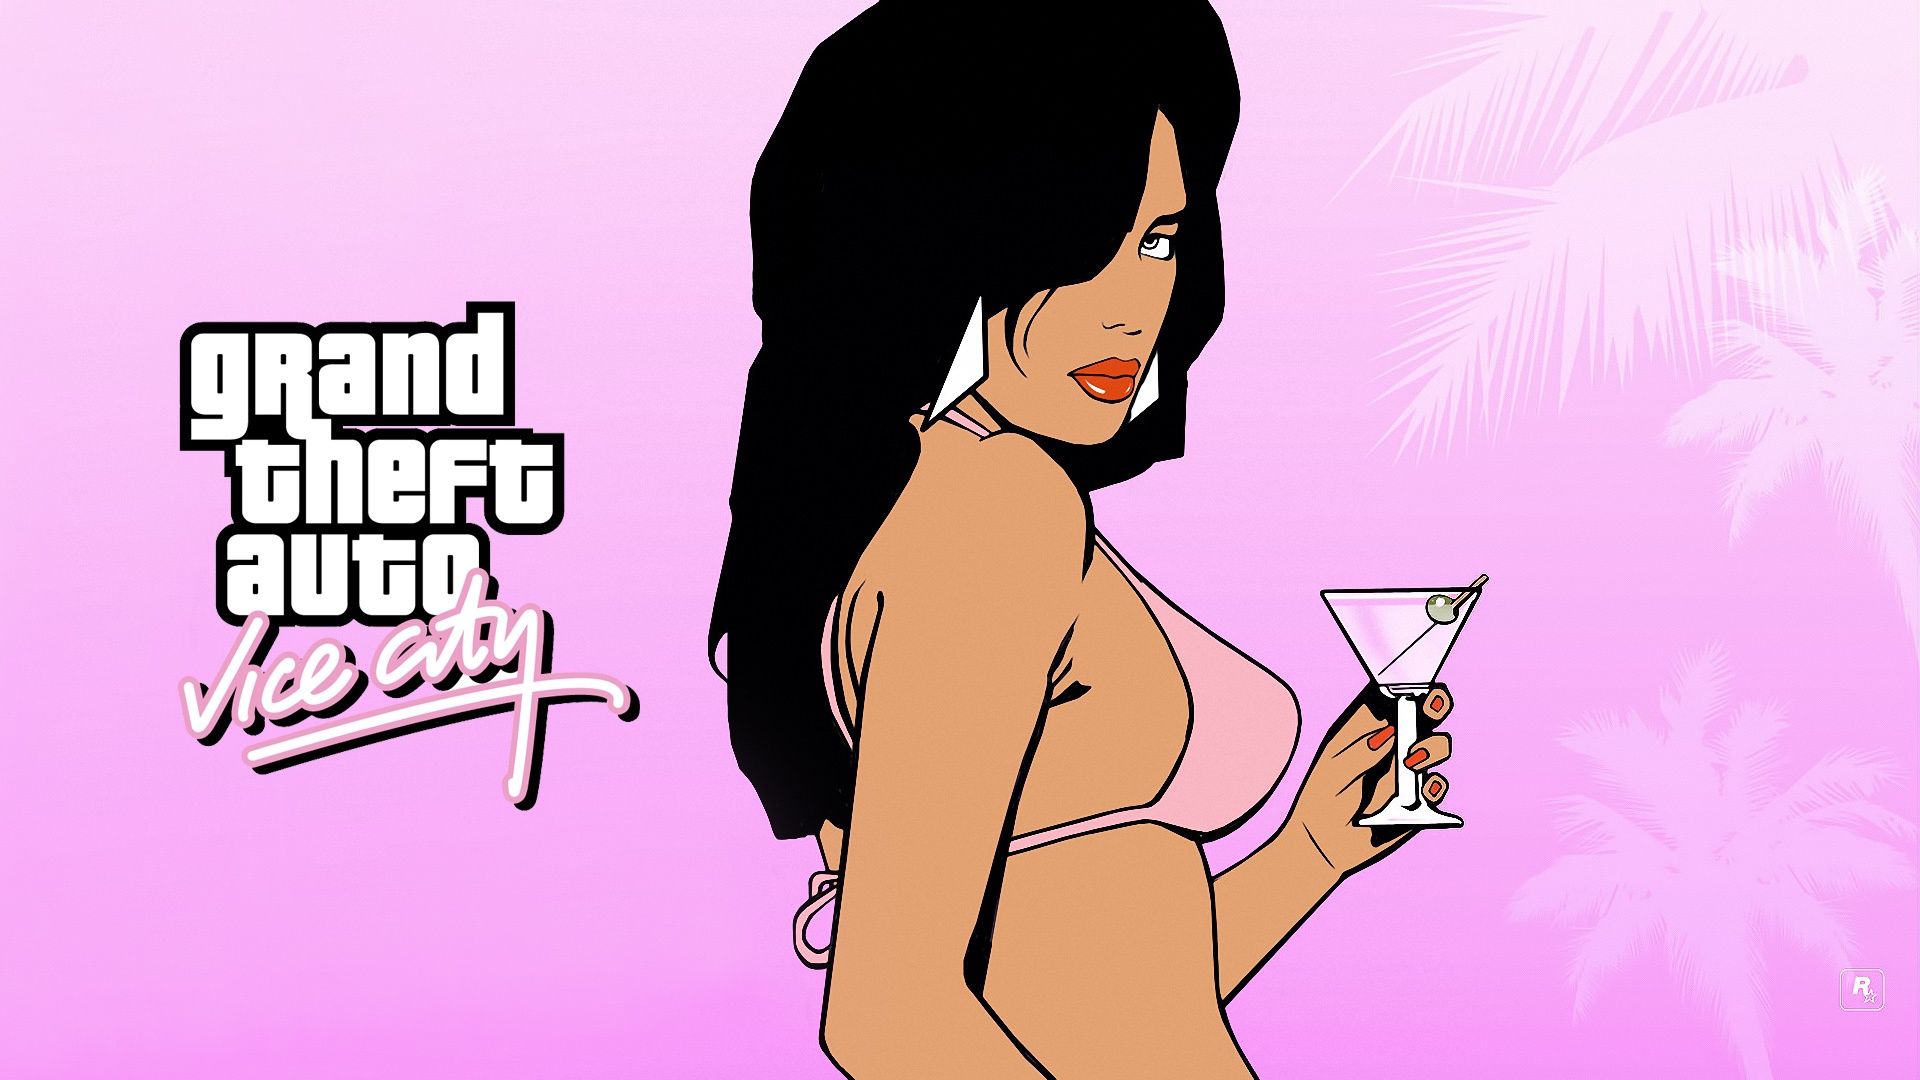 Video Game Grand Theft Auto: Vice City HD Wallpaper | Background Image